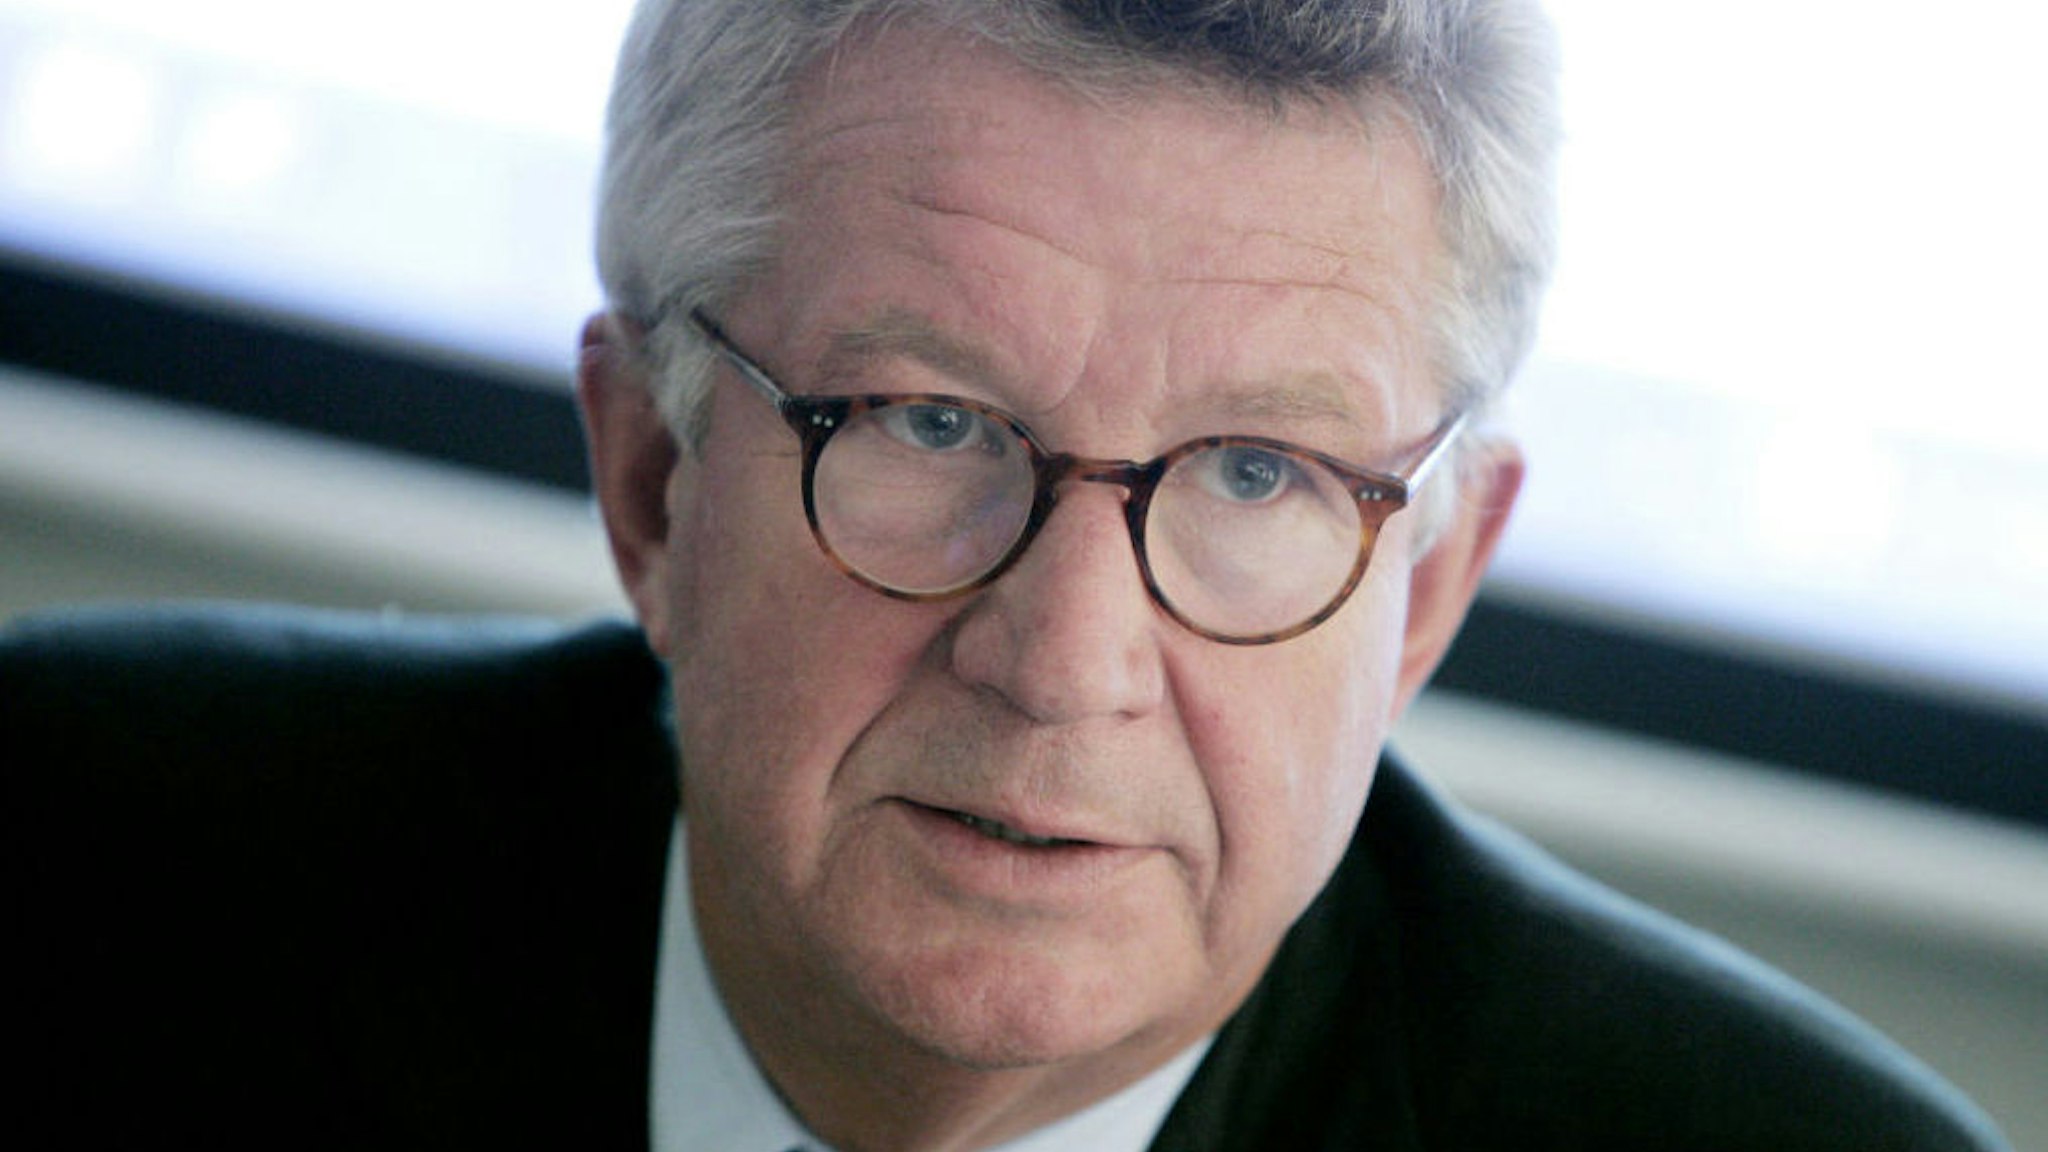 Picture released 18 November 2007 shows Professor Johan Giesecke, Chief Scientist at the European Centre for Disease Prevention and Control (ECDC) answering questions during a press conference in Stockholm.